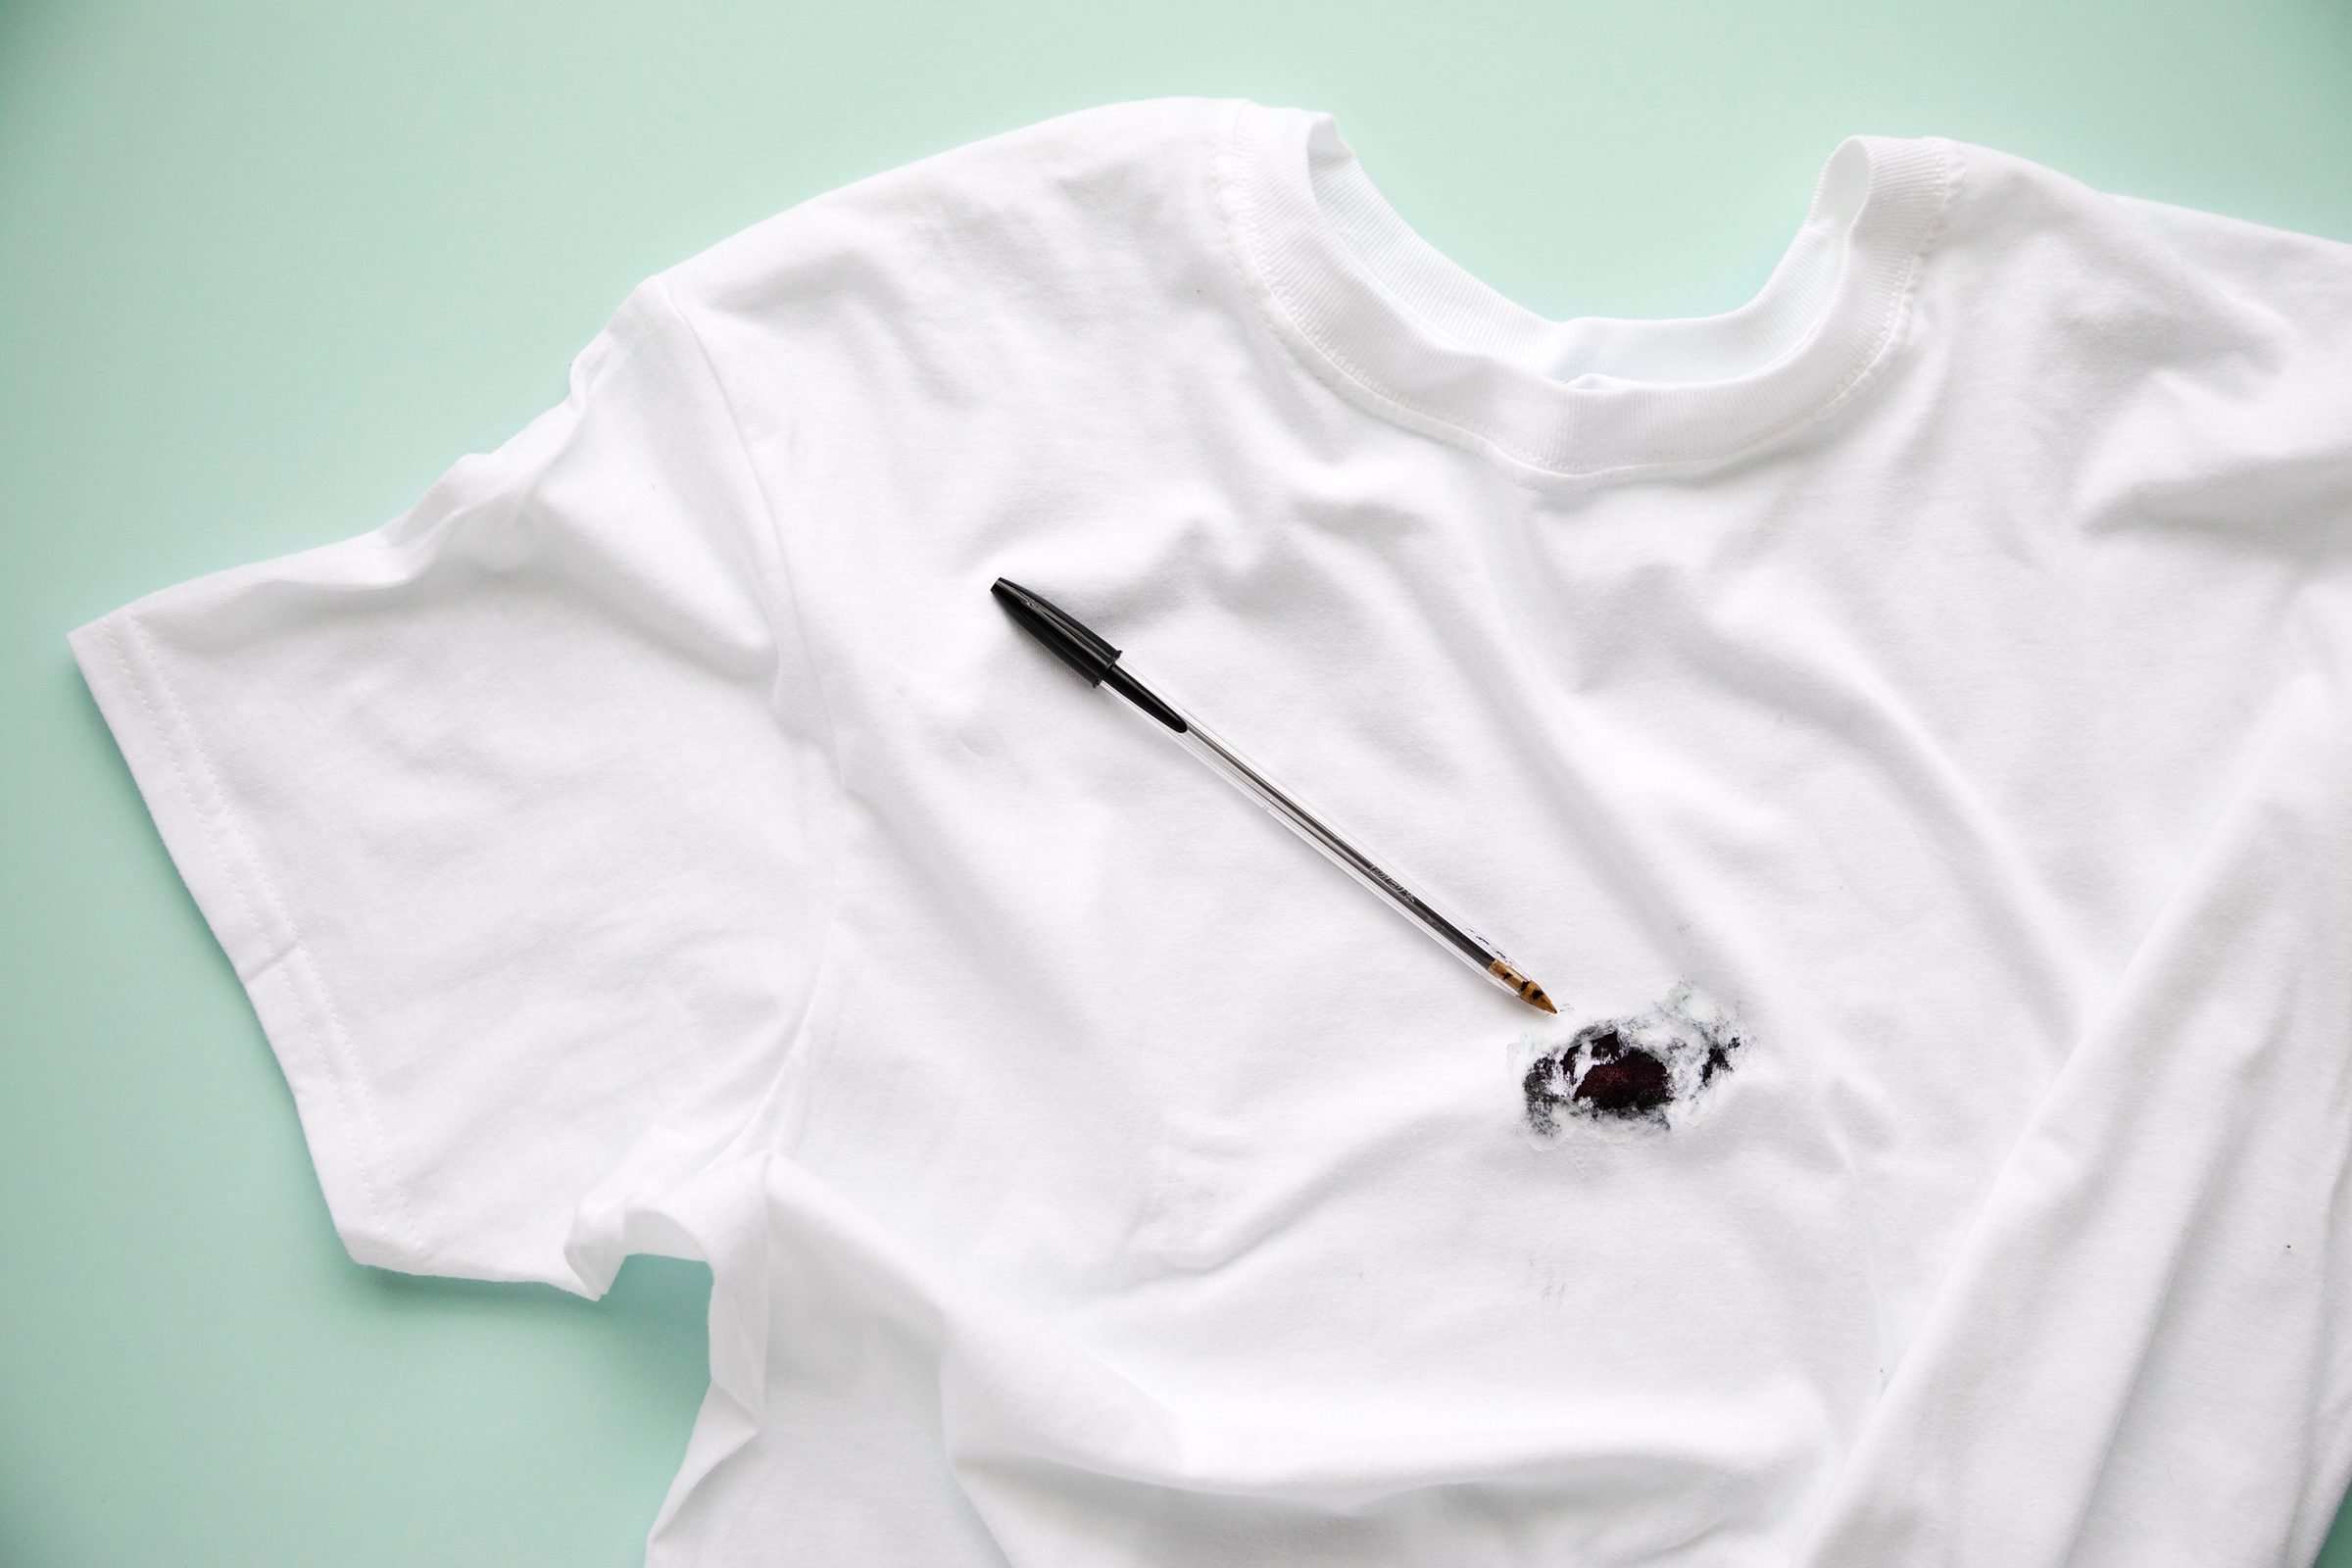 How to Get Ink Out of Clothes, According to Laundry Experts